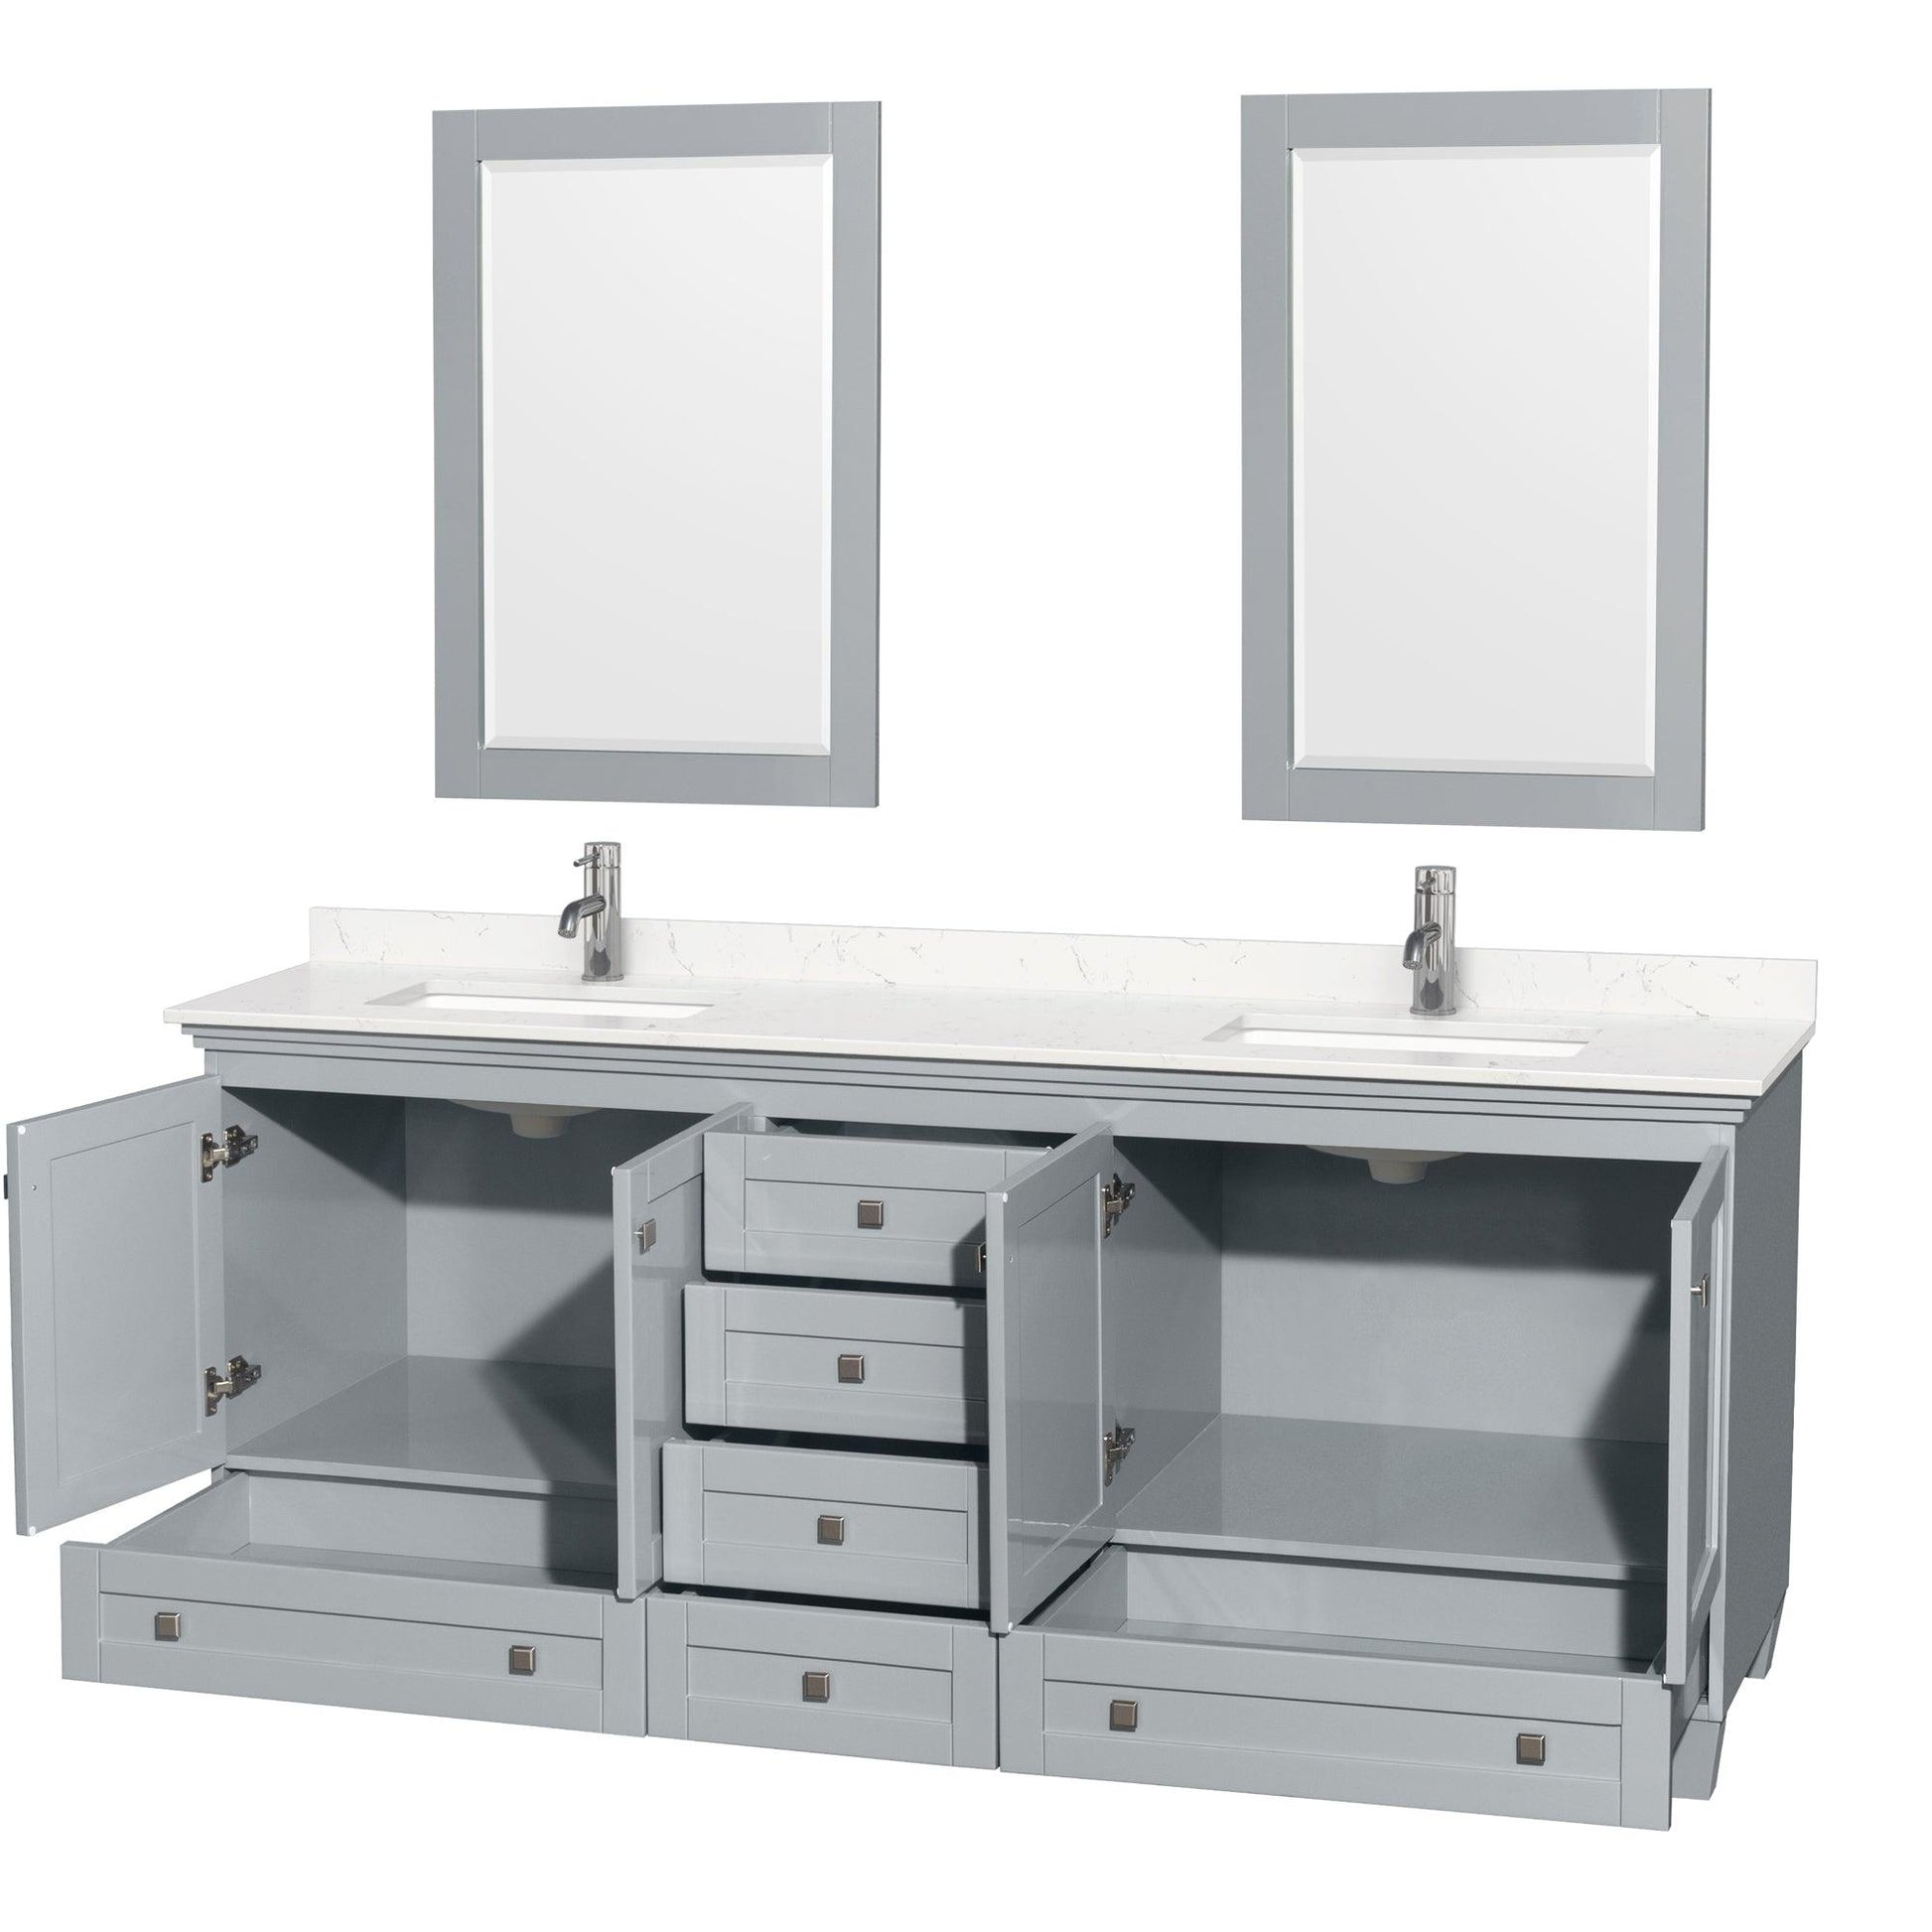 Wyndham Collection Acclaim Double Bathroom Vanity with Light-Vein Carrara Cultured Marble Countertop, Undermount Square Sinks, and Optional 24" Mirrors - Sea & Stone Bath